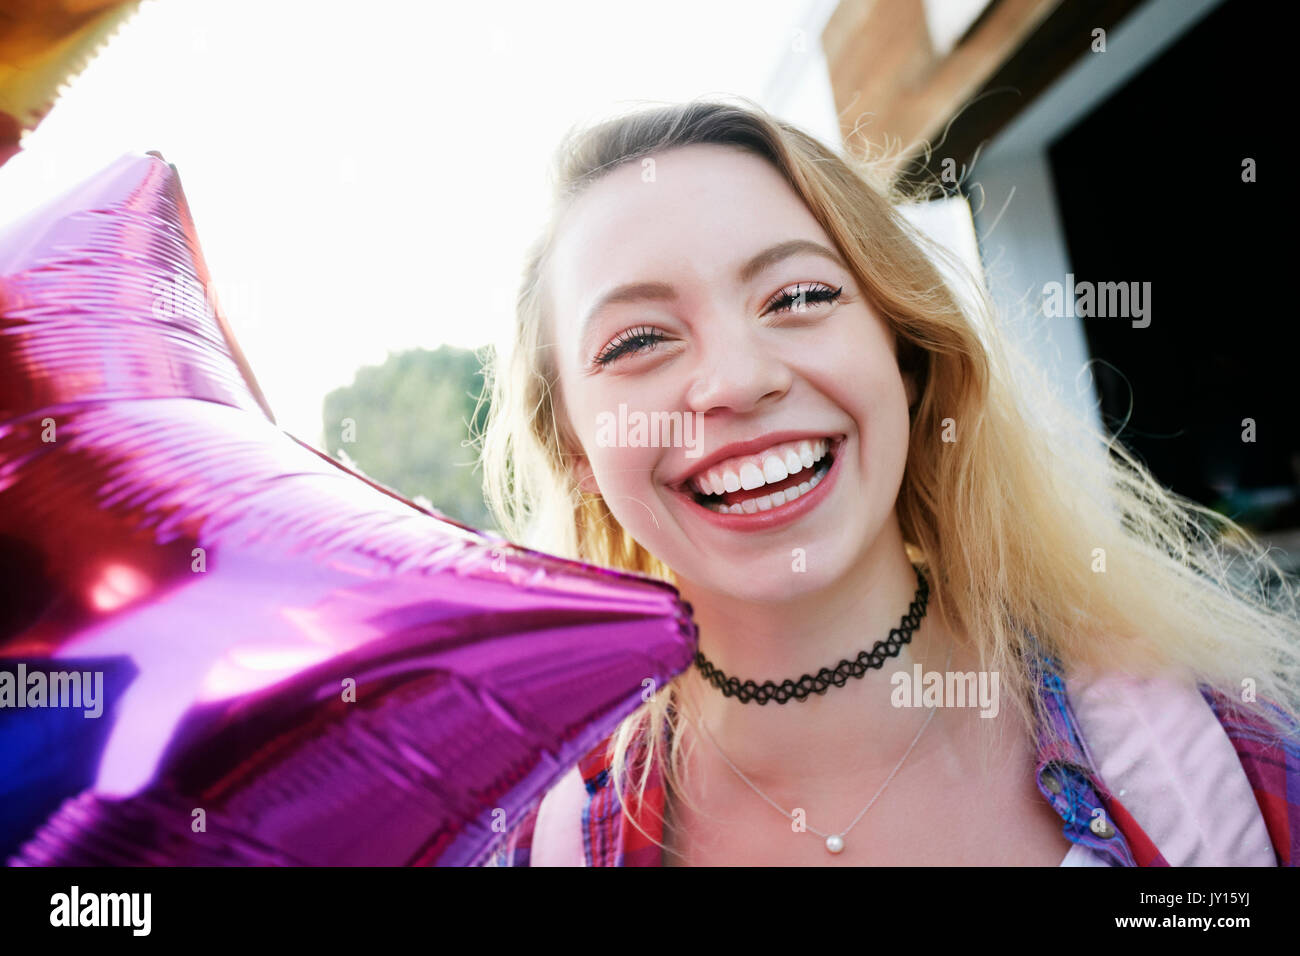 Portrait of Caucasian woman laughing and holding balloon Stock Photo